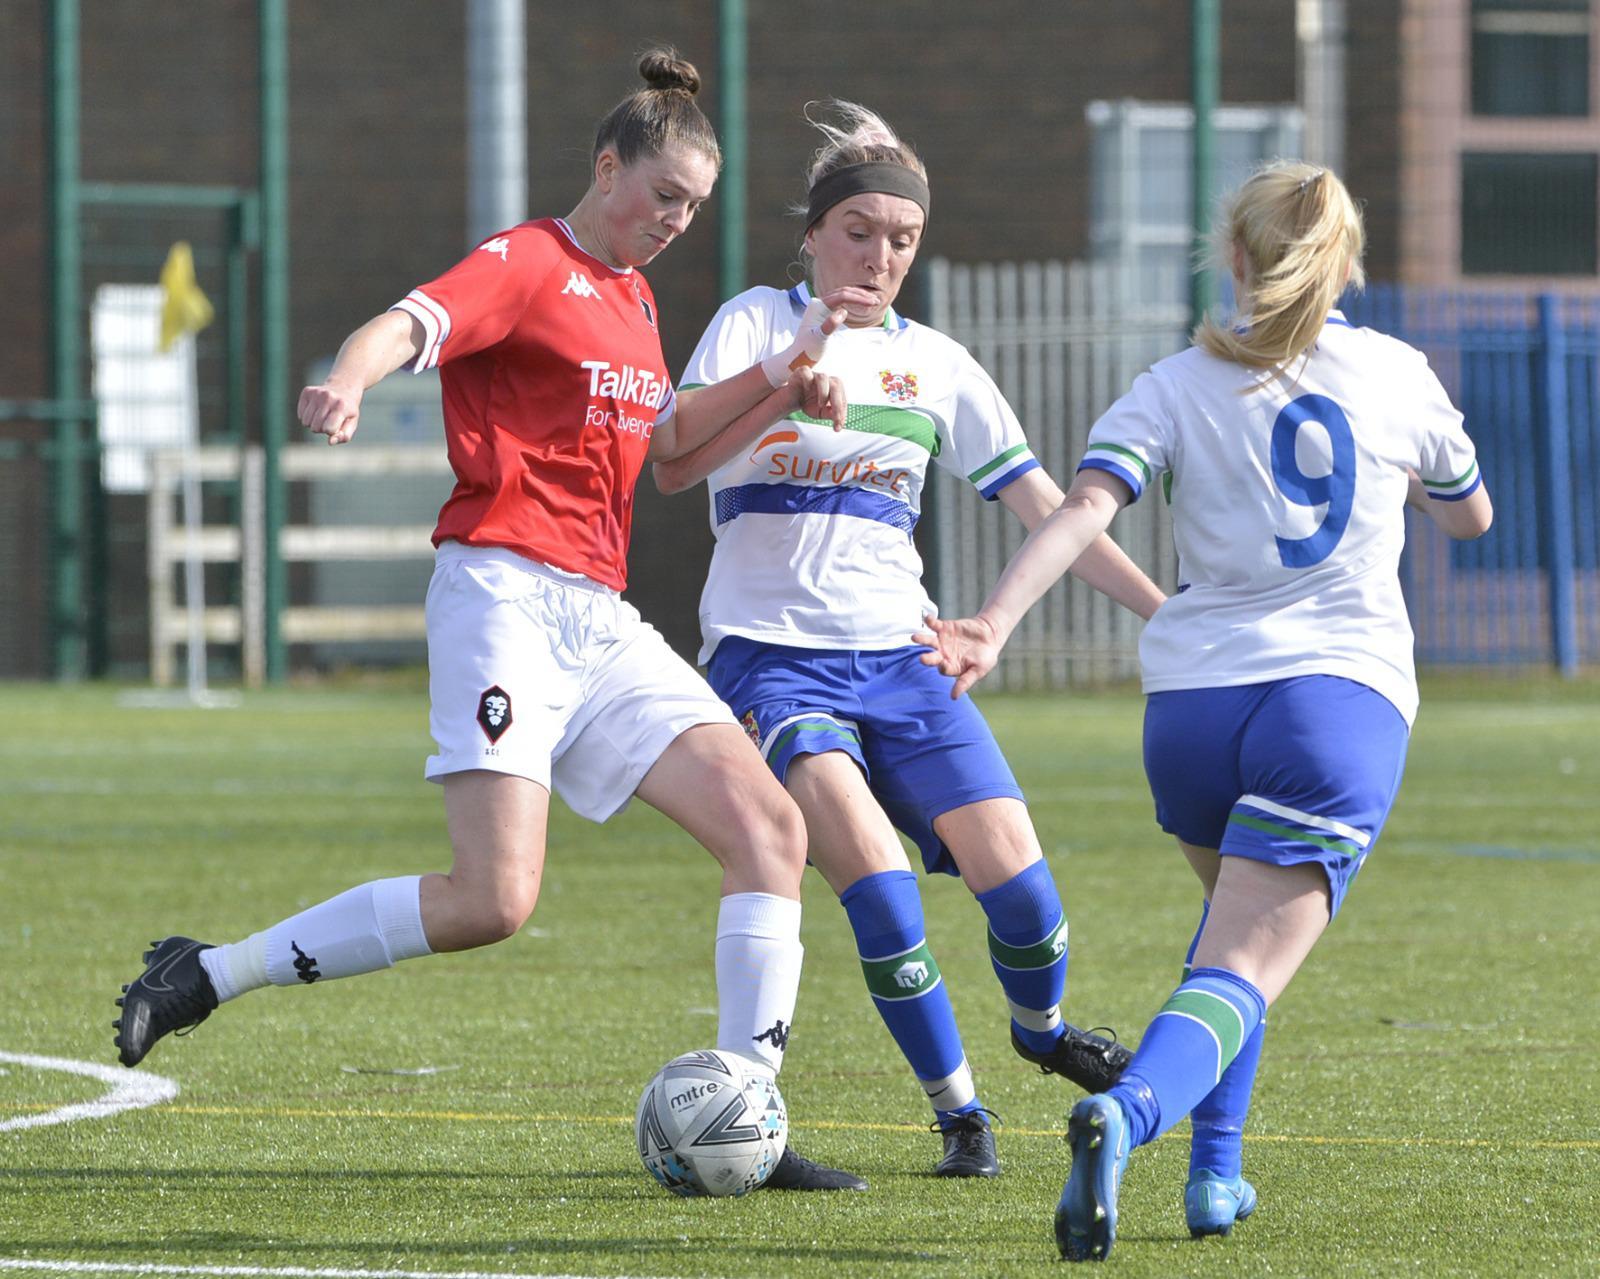 Tranmere Women recently beat Salford City women 3-1. Photo Tony Coombes